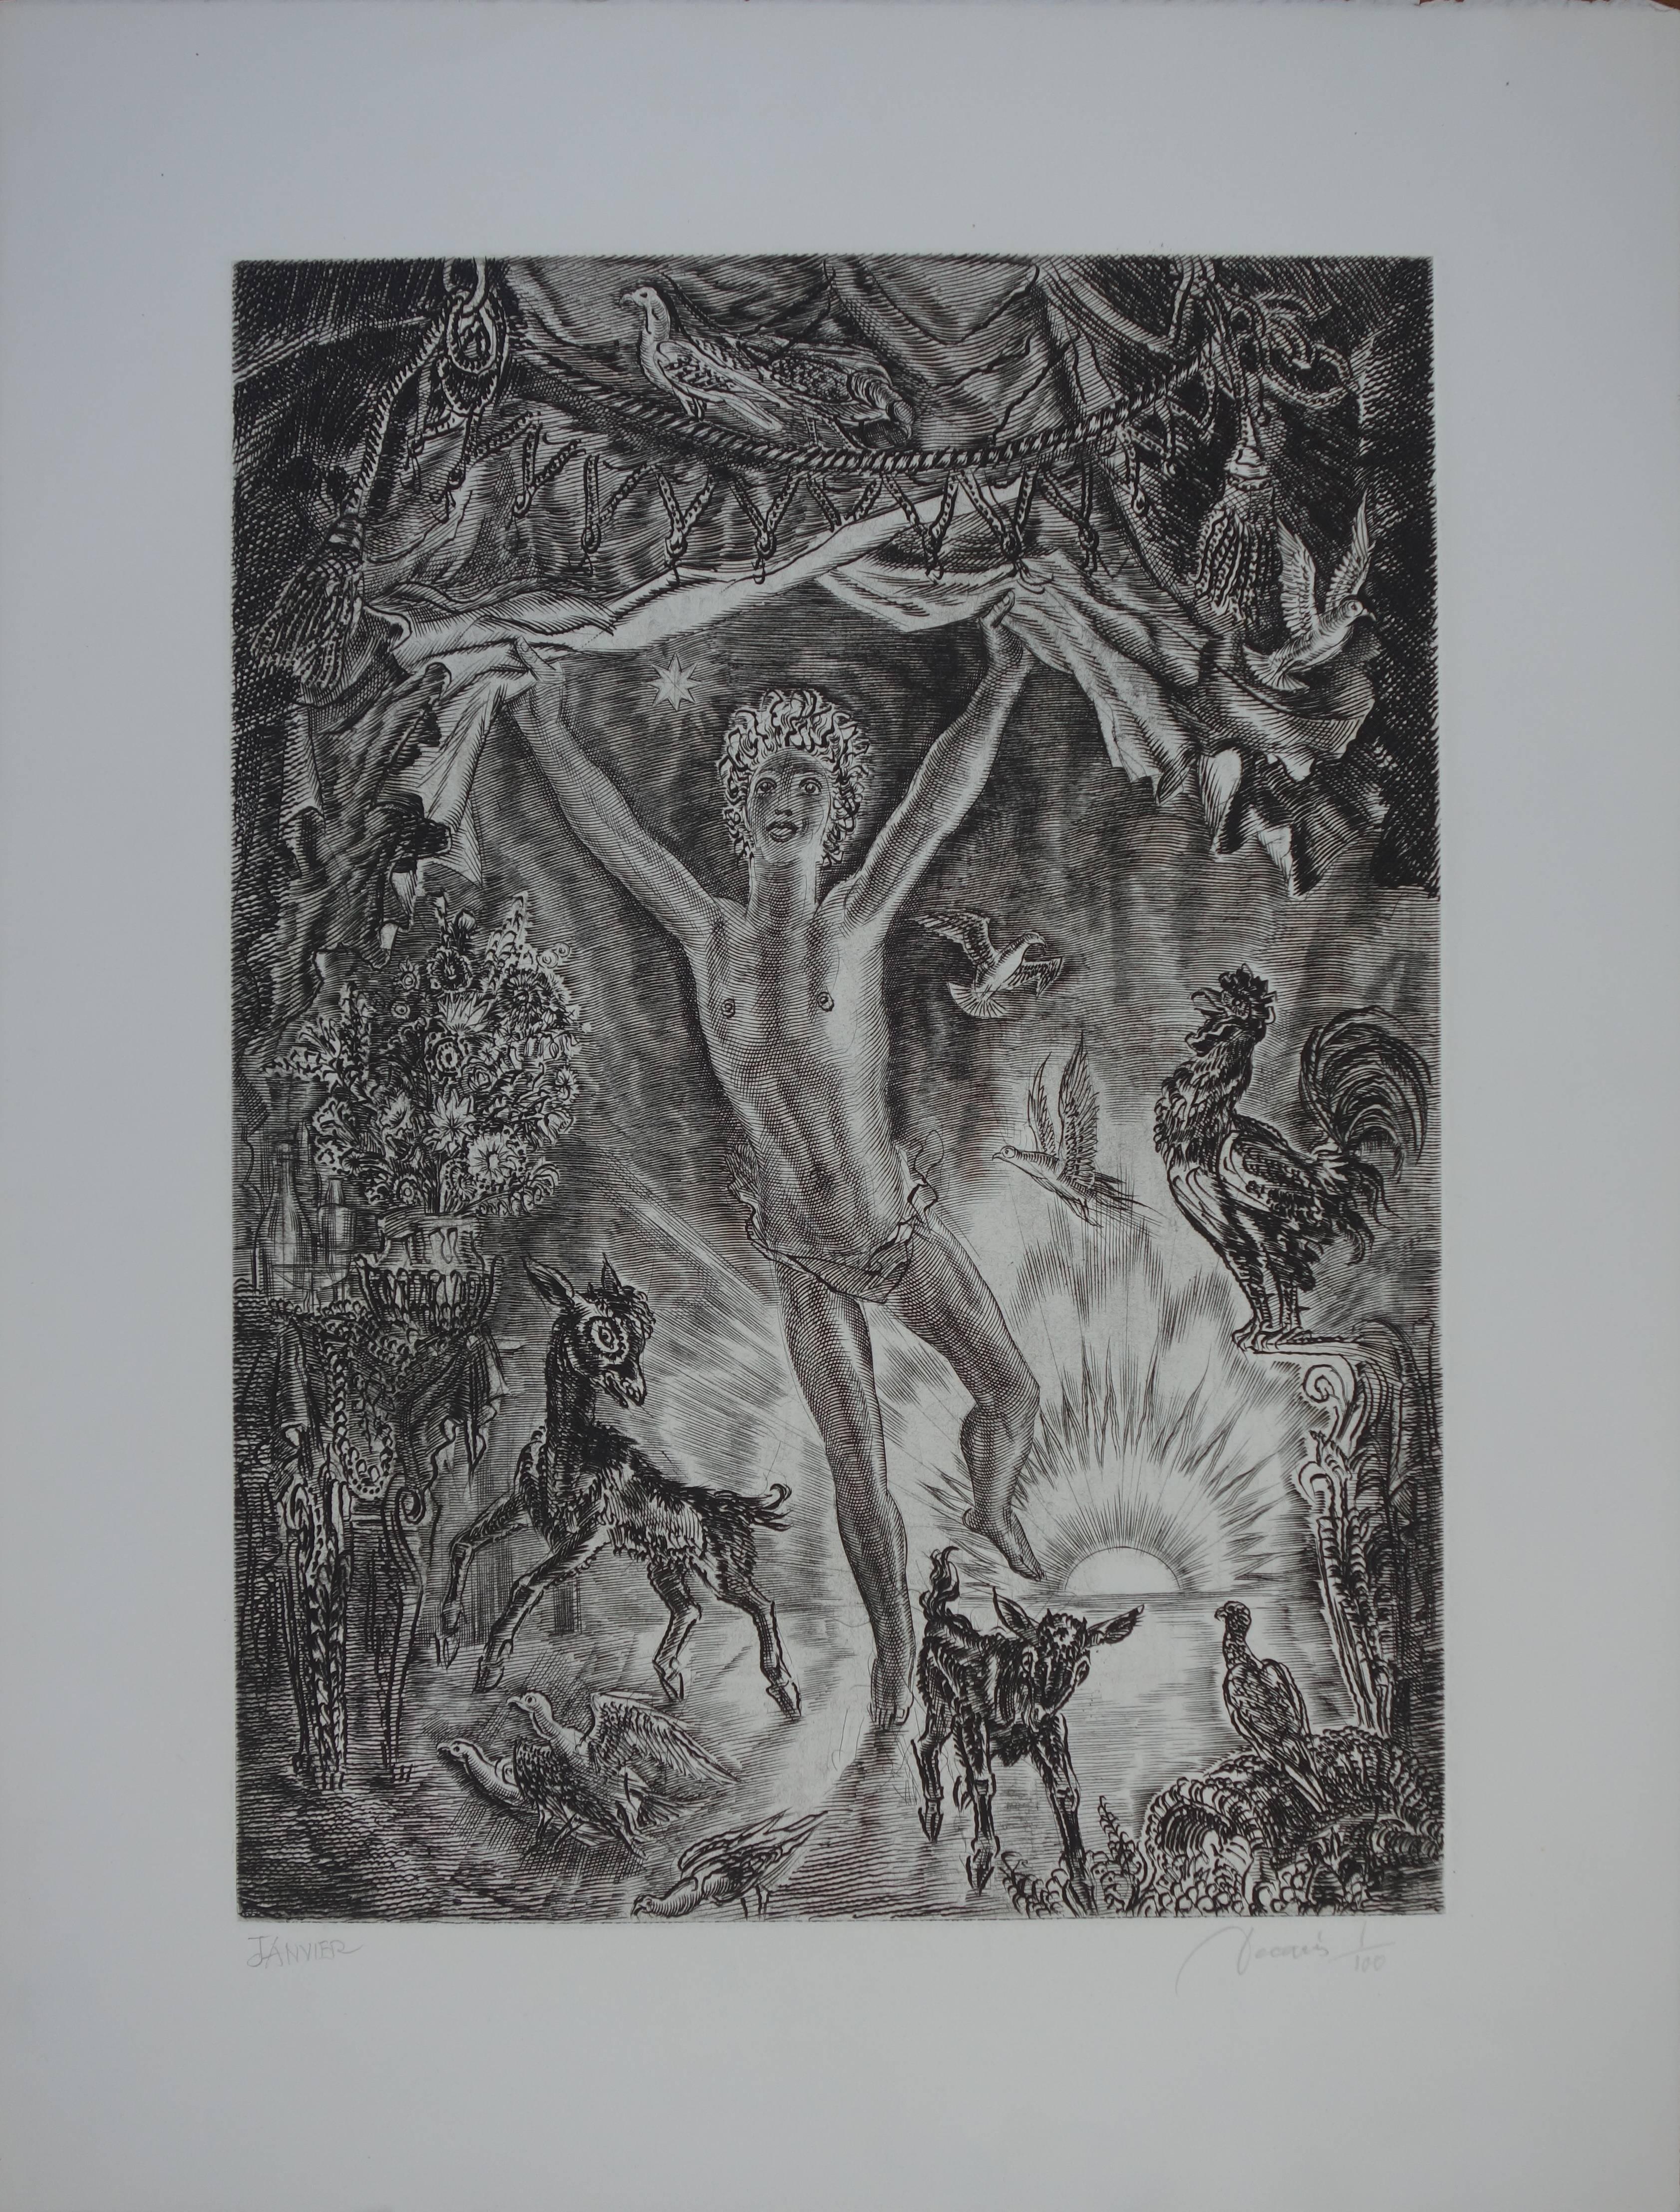 January : Rising New Year - Original handsigned etching - Exceptional n° 1/100